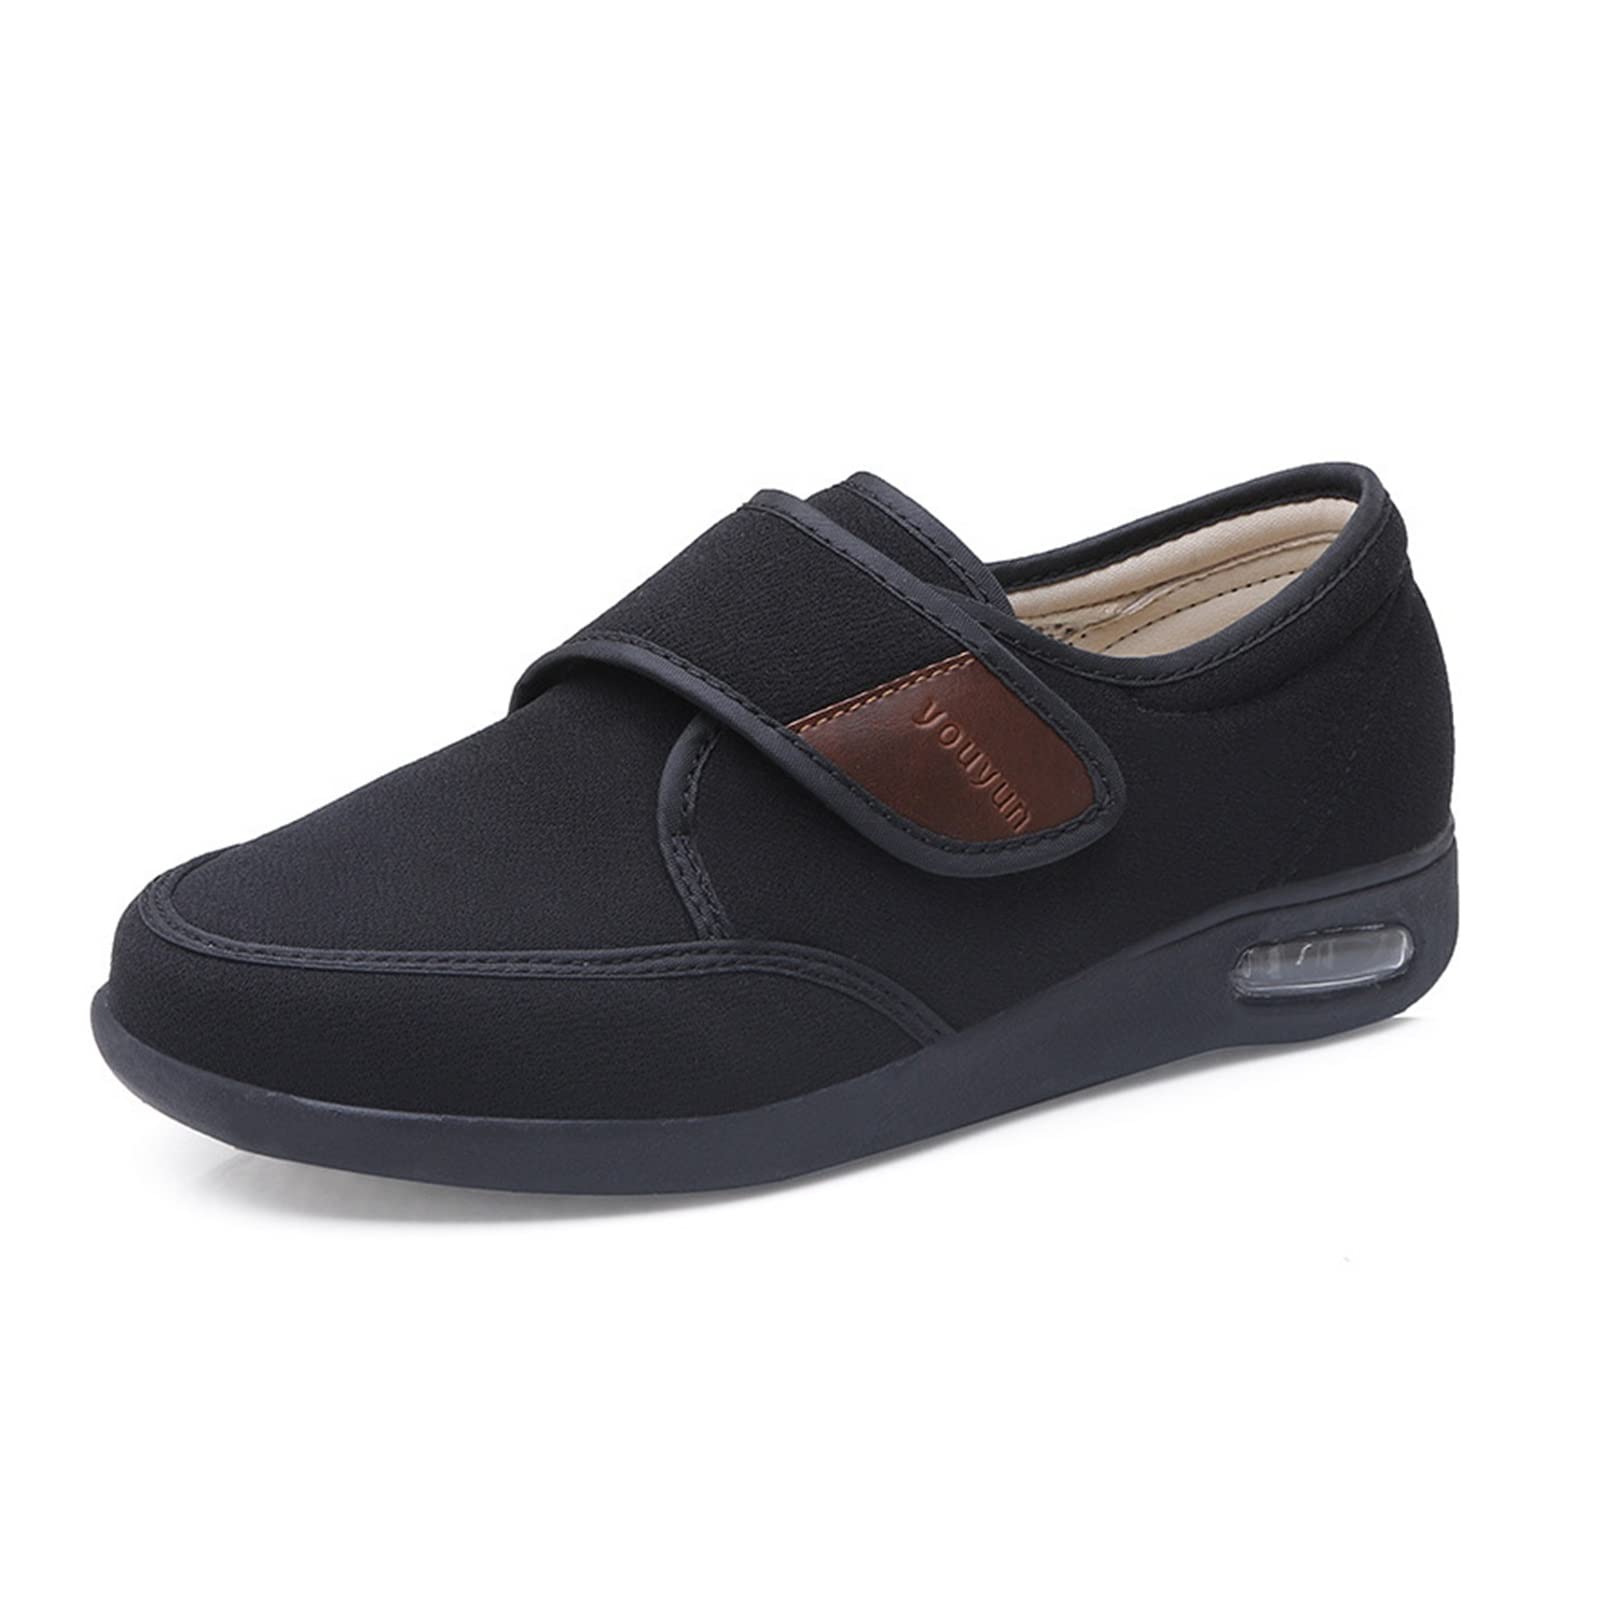 Men's Recovery & Comfort Shoes